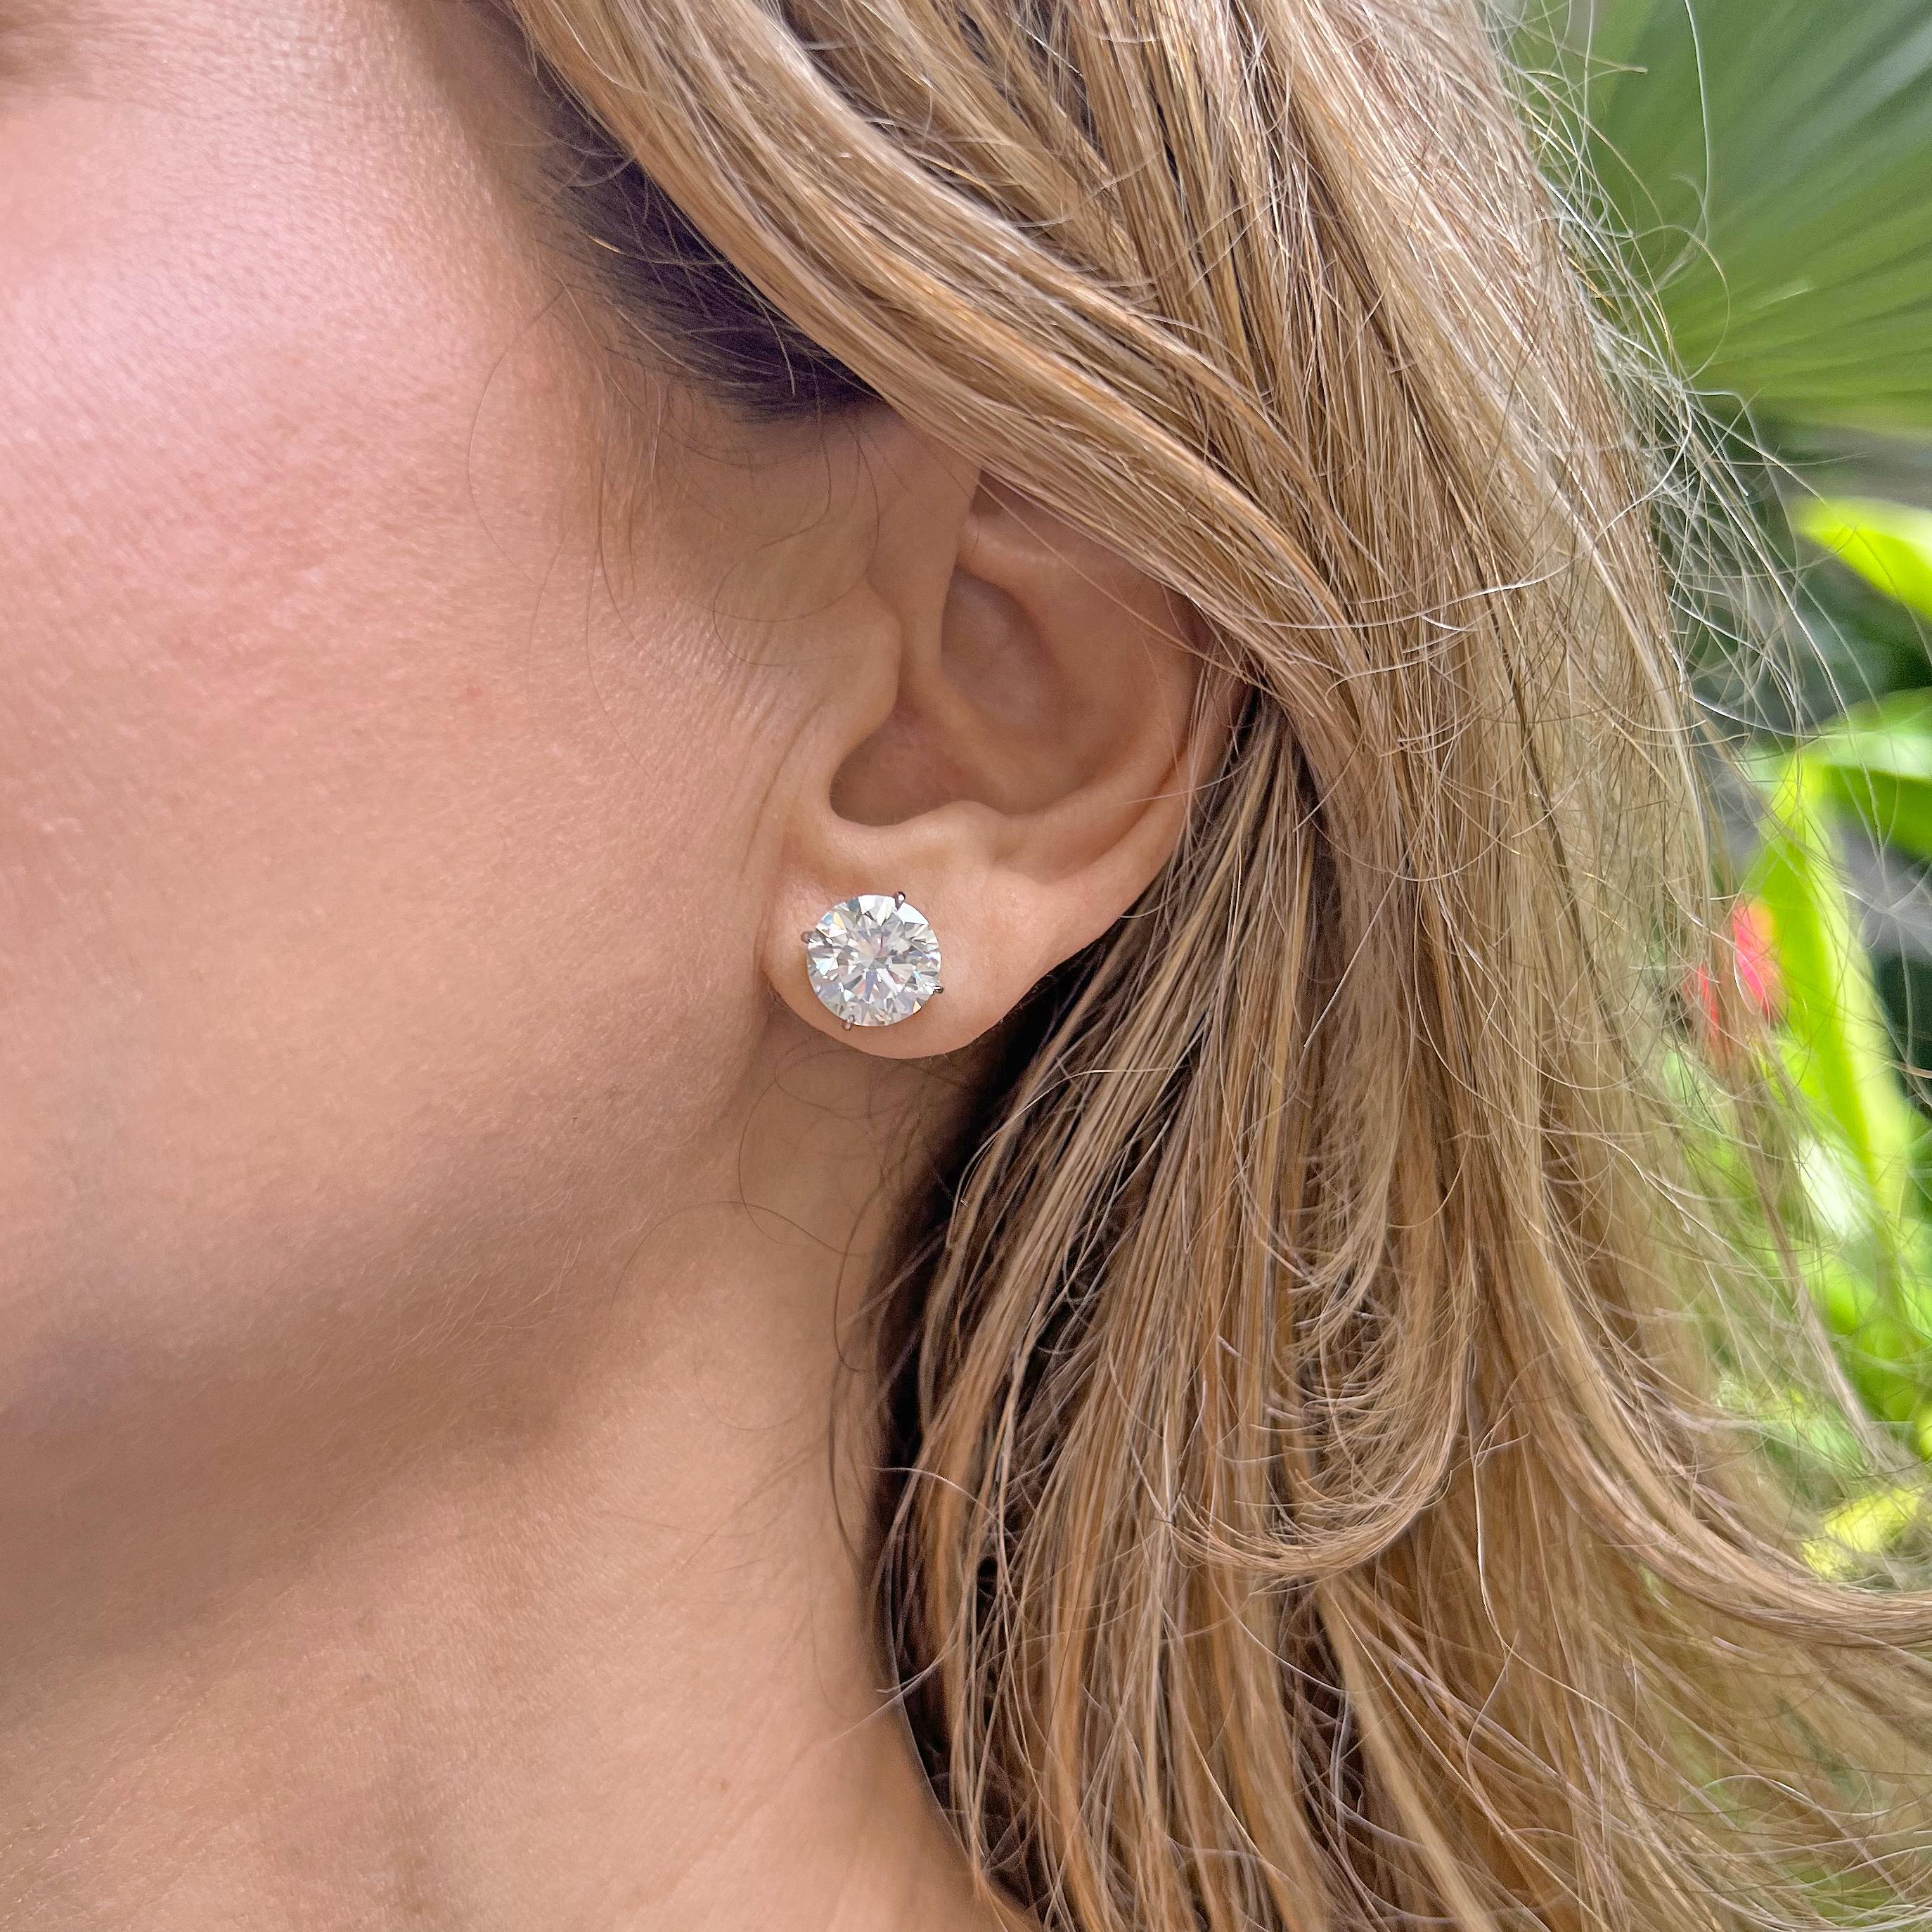 Round brilliant cut diamond stud earrings, showcasing a pair of well-matched near-colorless diamonds weighing 7.70 total carats, the diamonds secured in four-prong platinum martini settings with posts for pierced ears. Both diamonds are J-color and